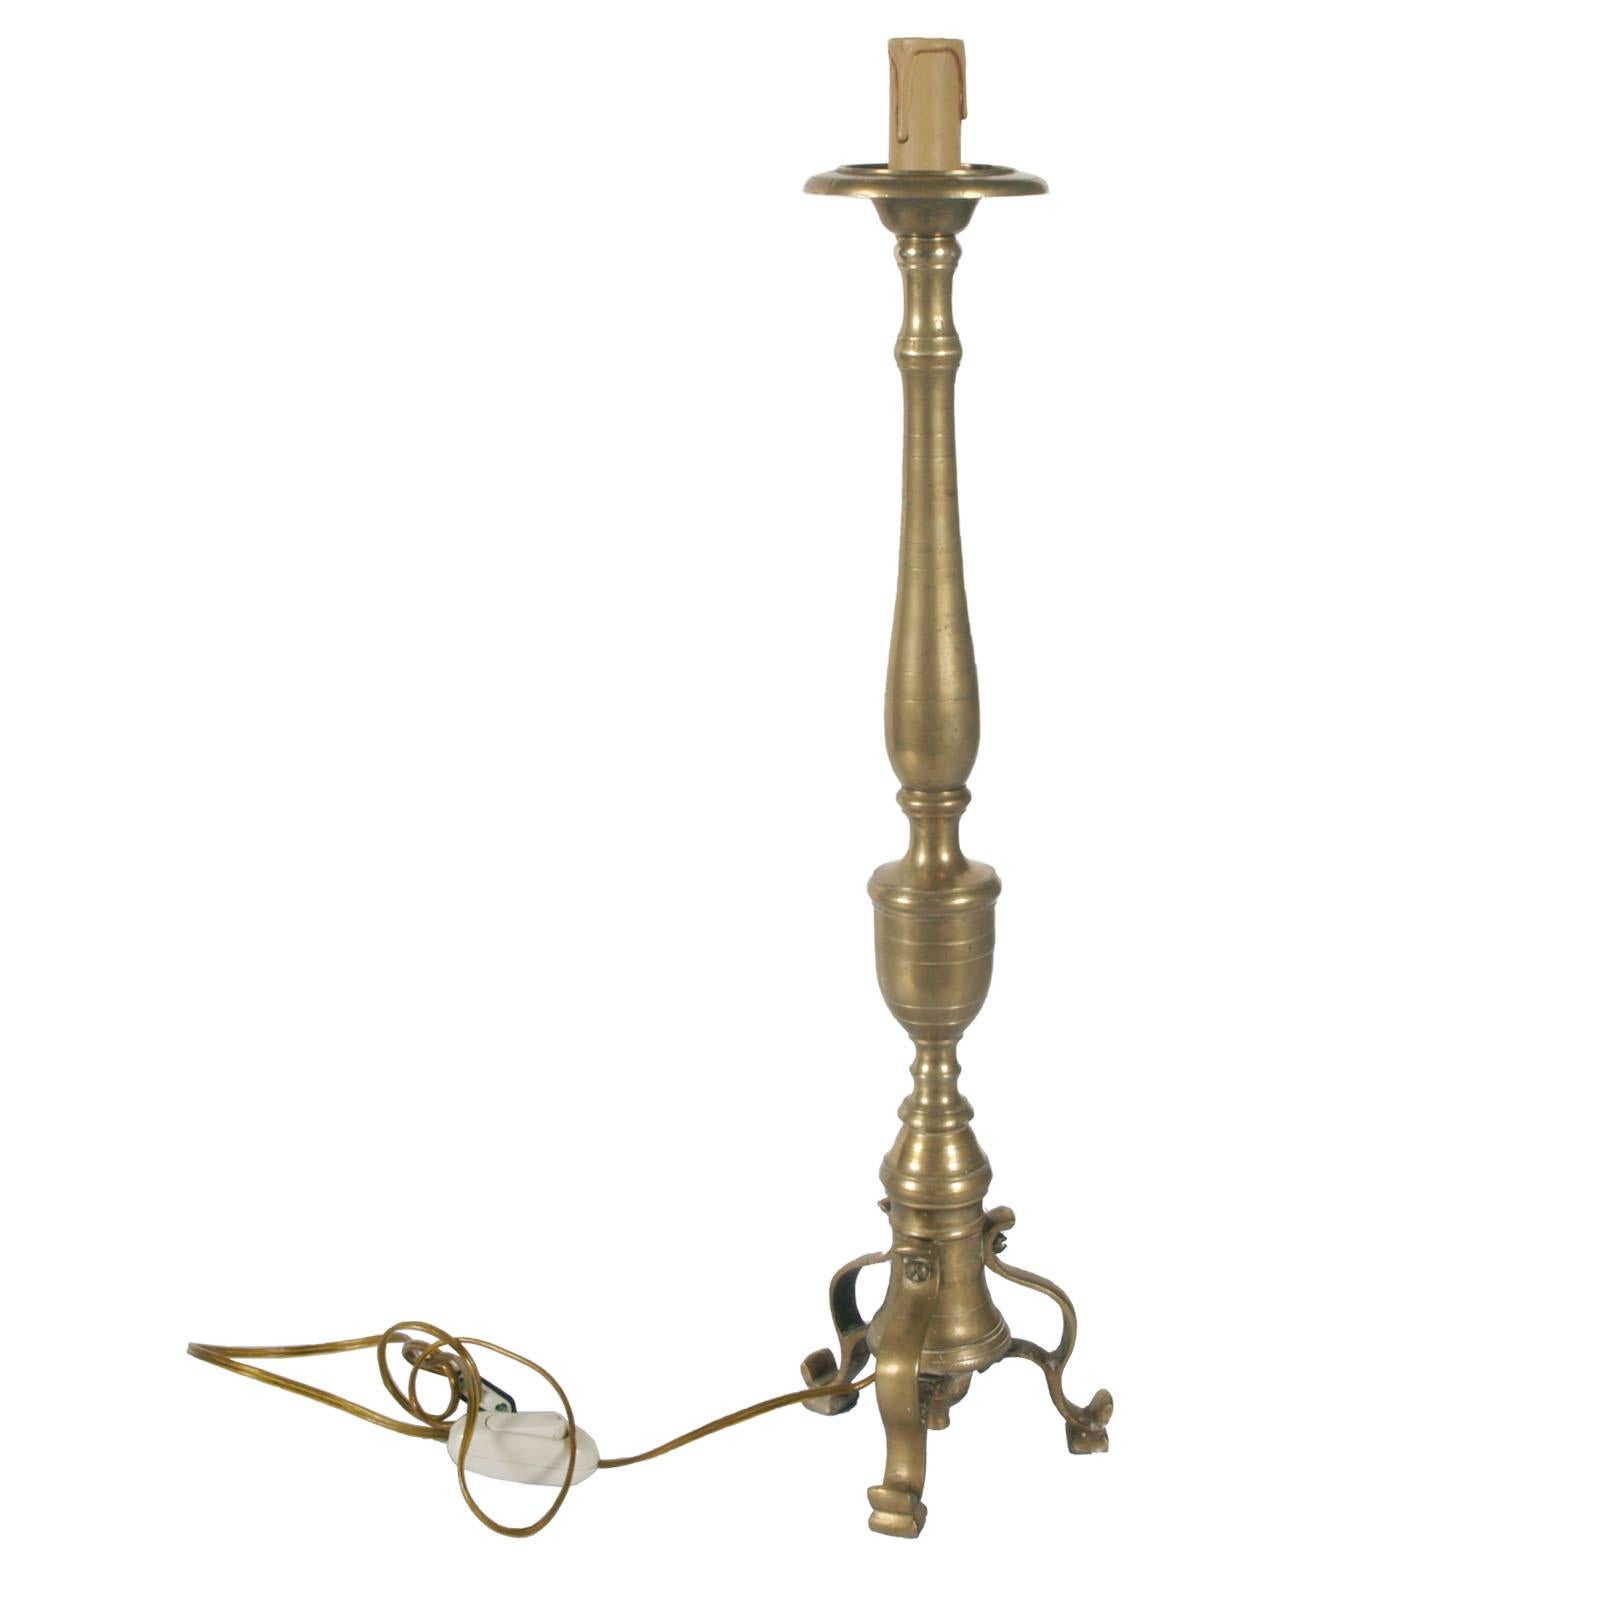 Heavy and massive original 18th century antique lampholder candelabrum in gilt brass with tripod stand

Measures cm: height 57, diameter 13.